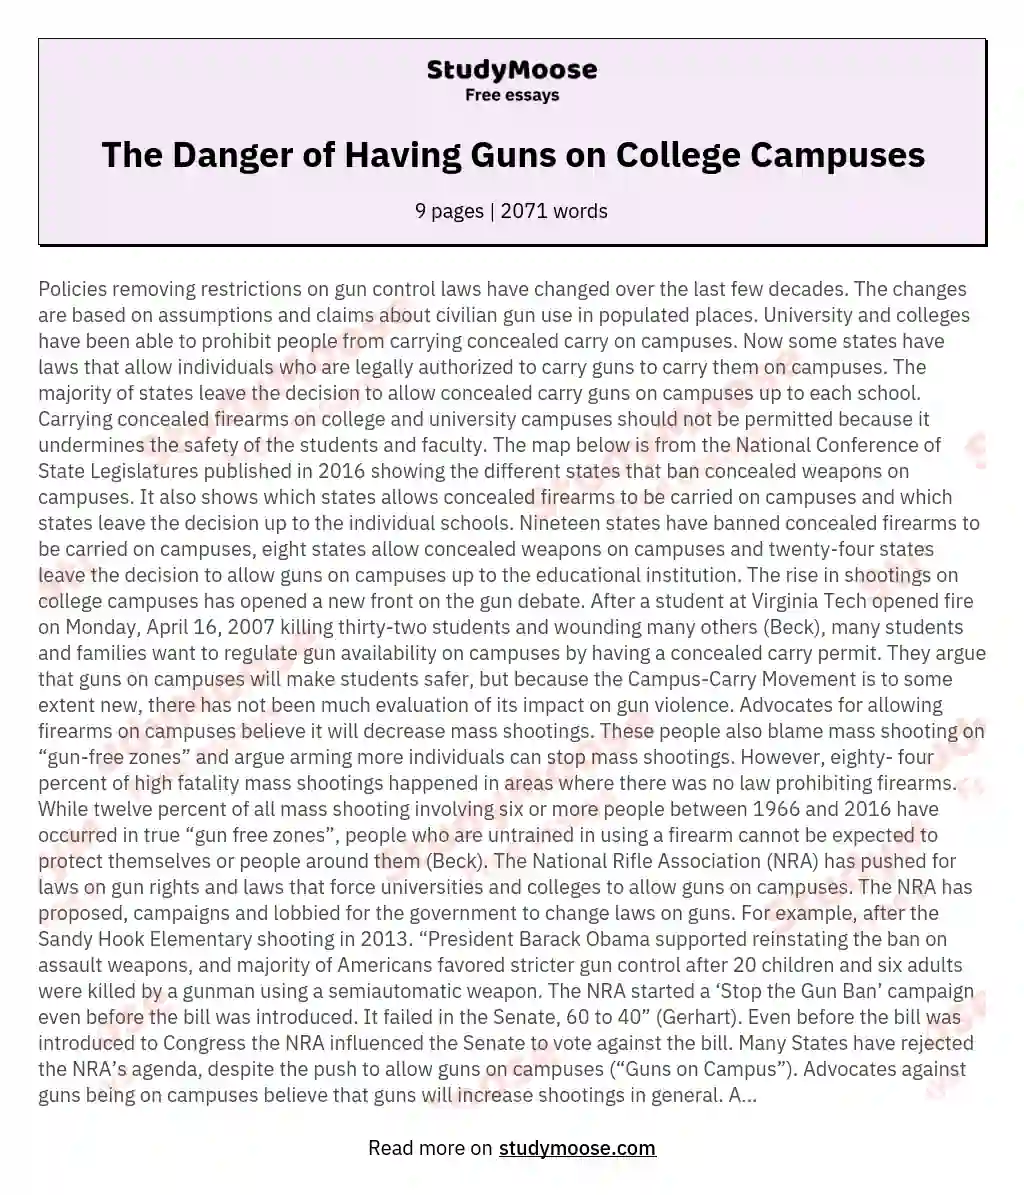 The Danger of Having Guns on College Campuses